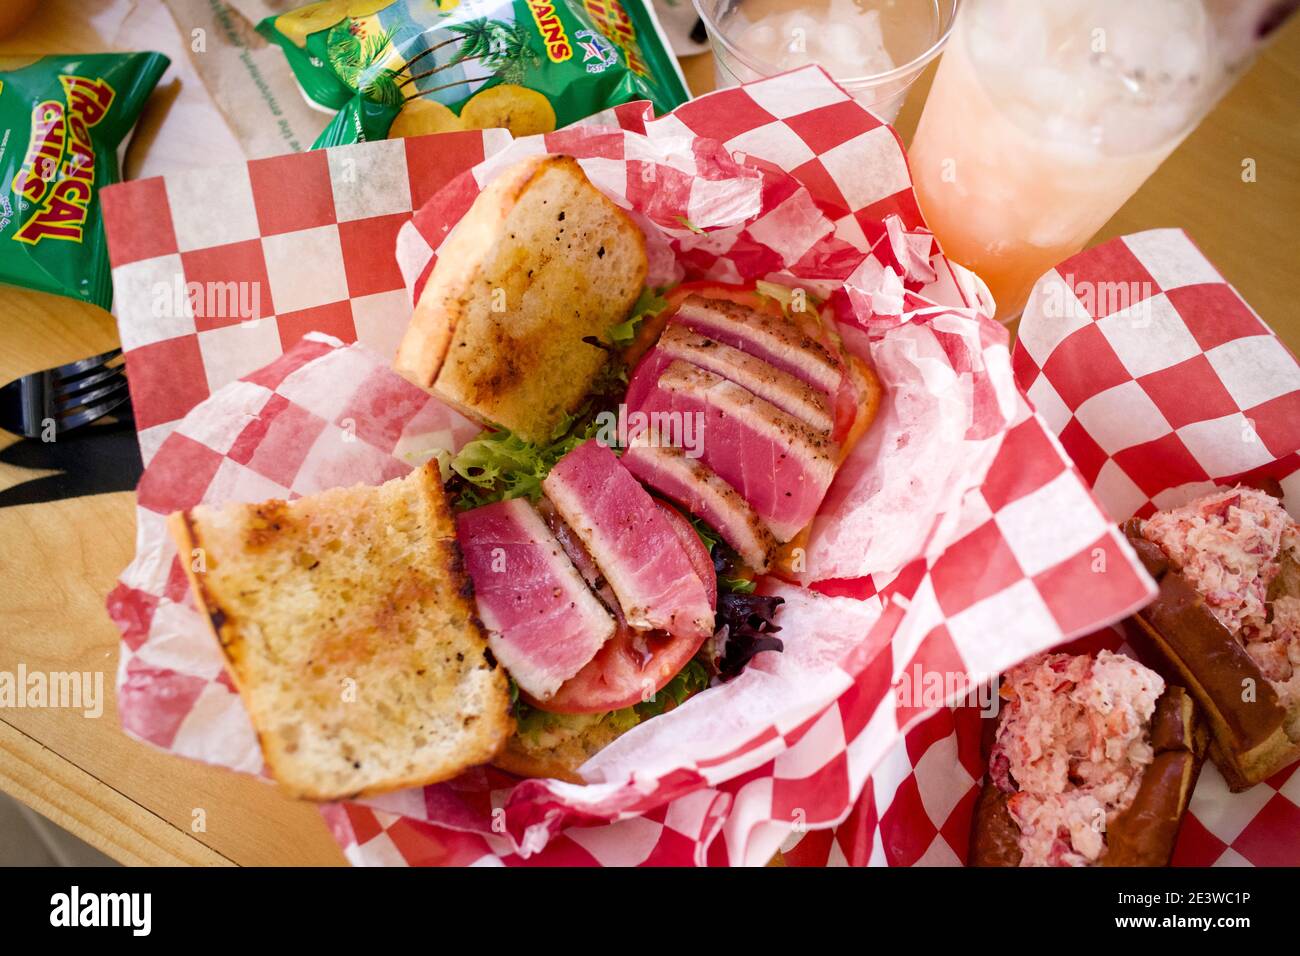 Seared Tuna sandwiches and lobster rolls at the Casa Marina Resort in Key West, FL, USA. Famous destination location. Stock Photo